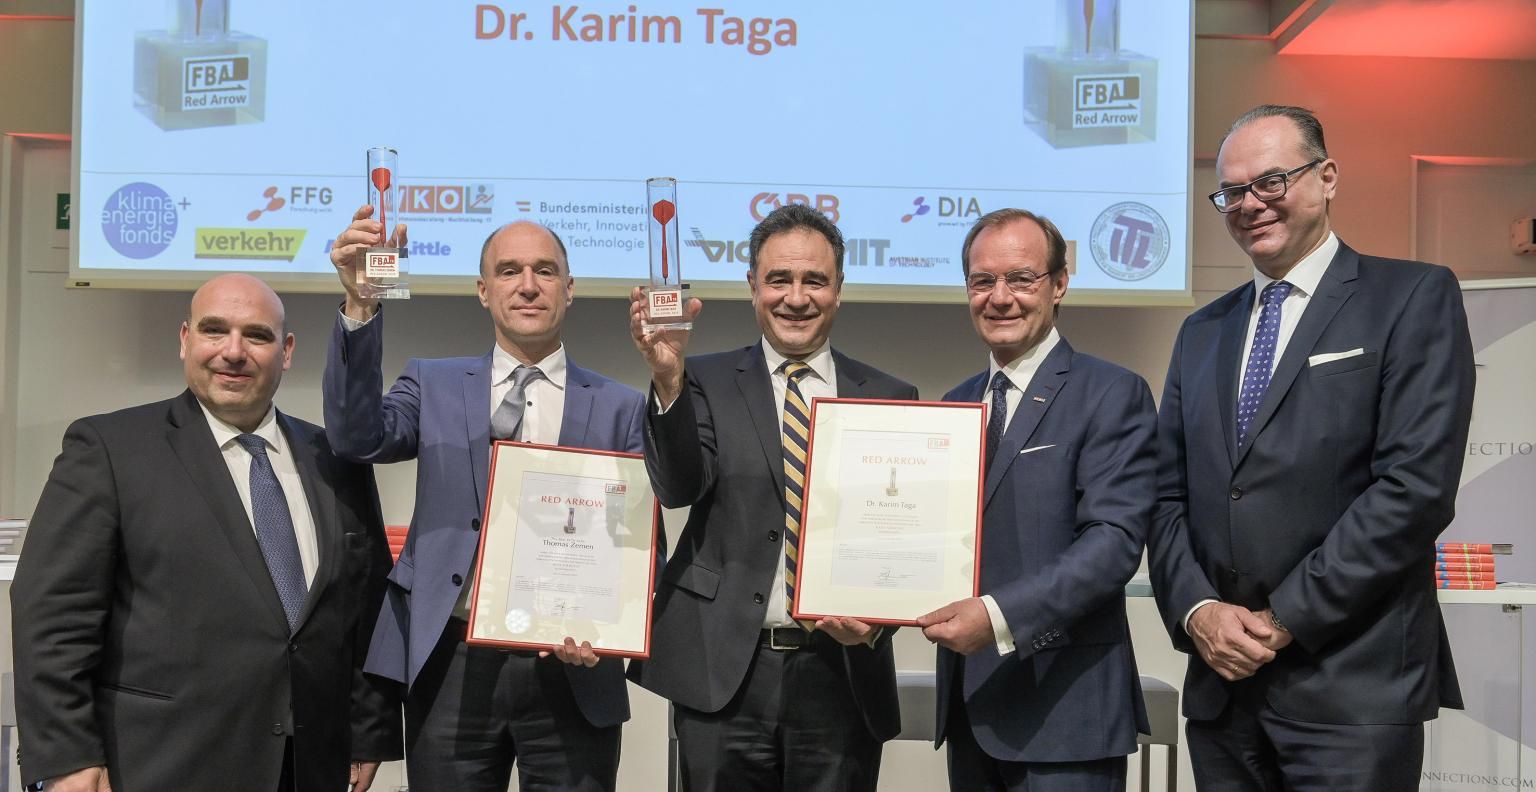 Arthur D. Little Managing Partner Karim Taga wins prestigious award for his 5G expertise and contribution in the infrastructure business